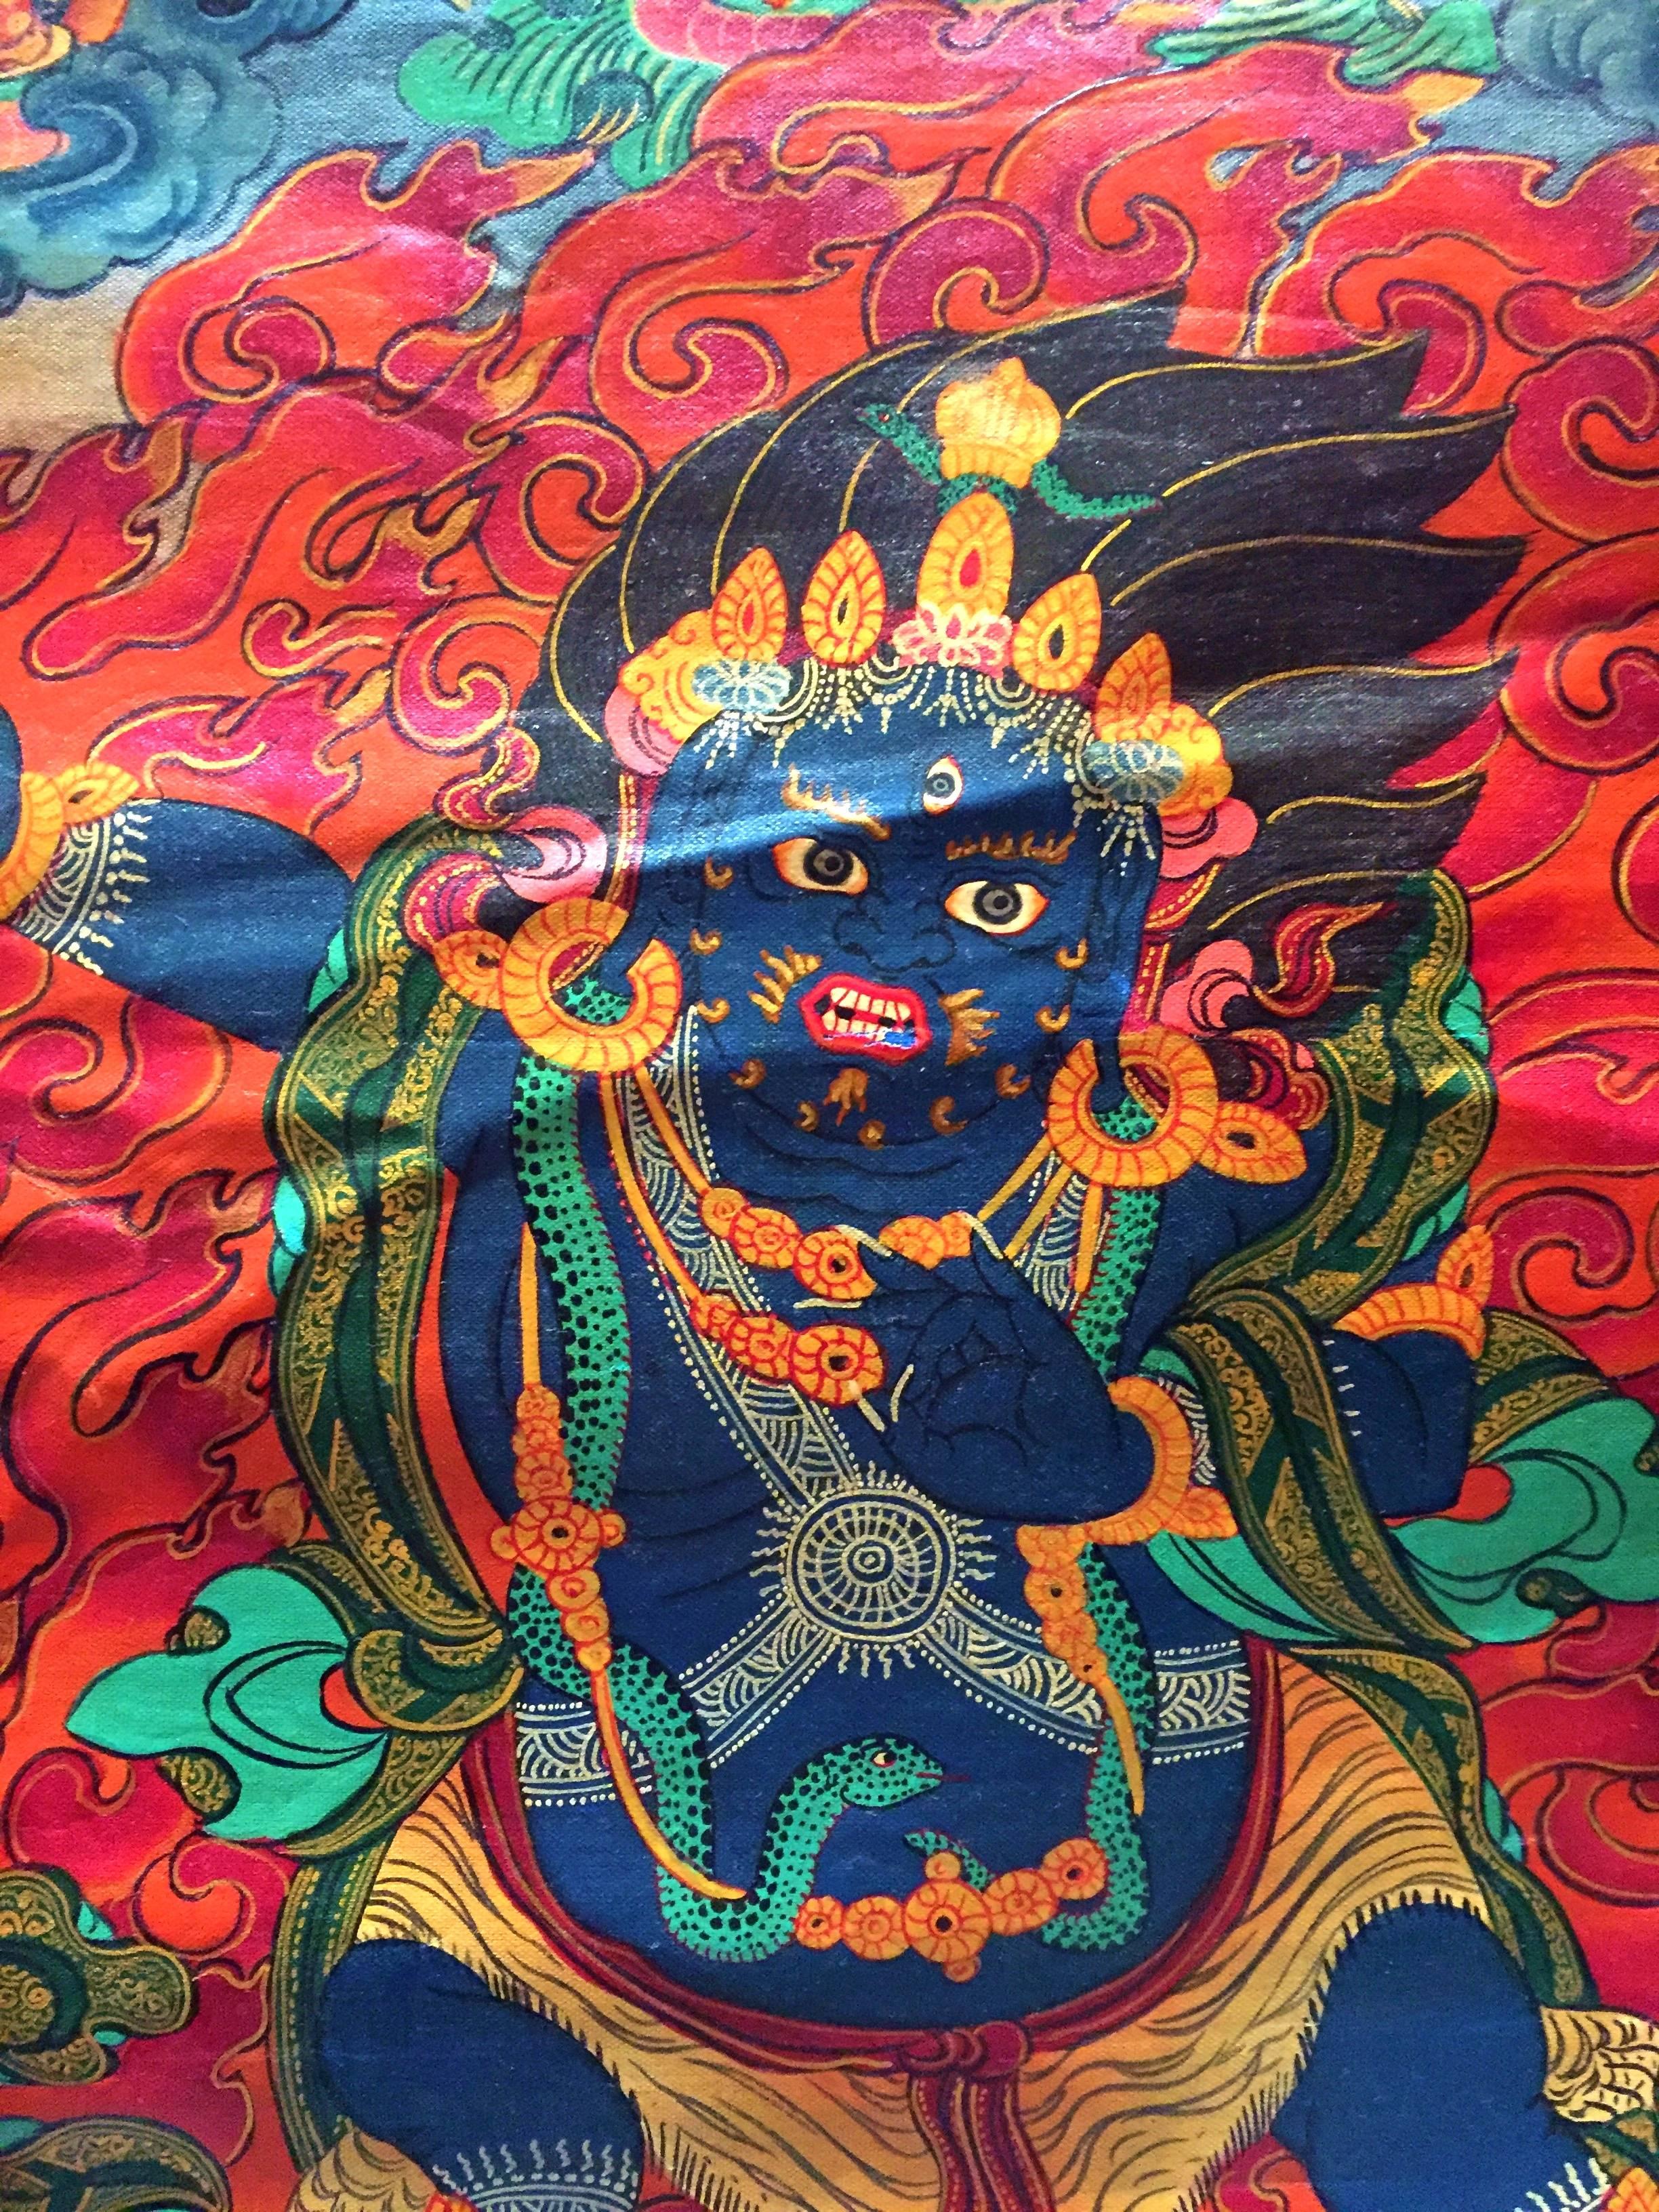 Our Tanka is painstakingly painted by Tibetan artists. Tanka depicts the protection god Dorje Drolo whose ferocious expression subdues negative and demonic forces. Comes with its own protective cover in sheer green organza.